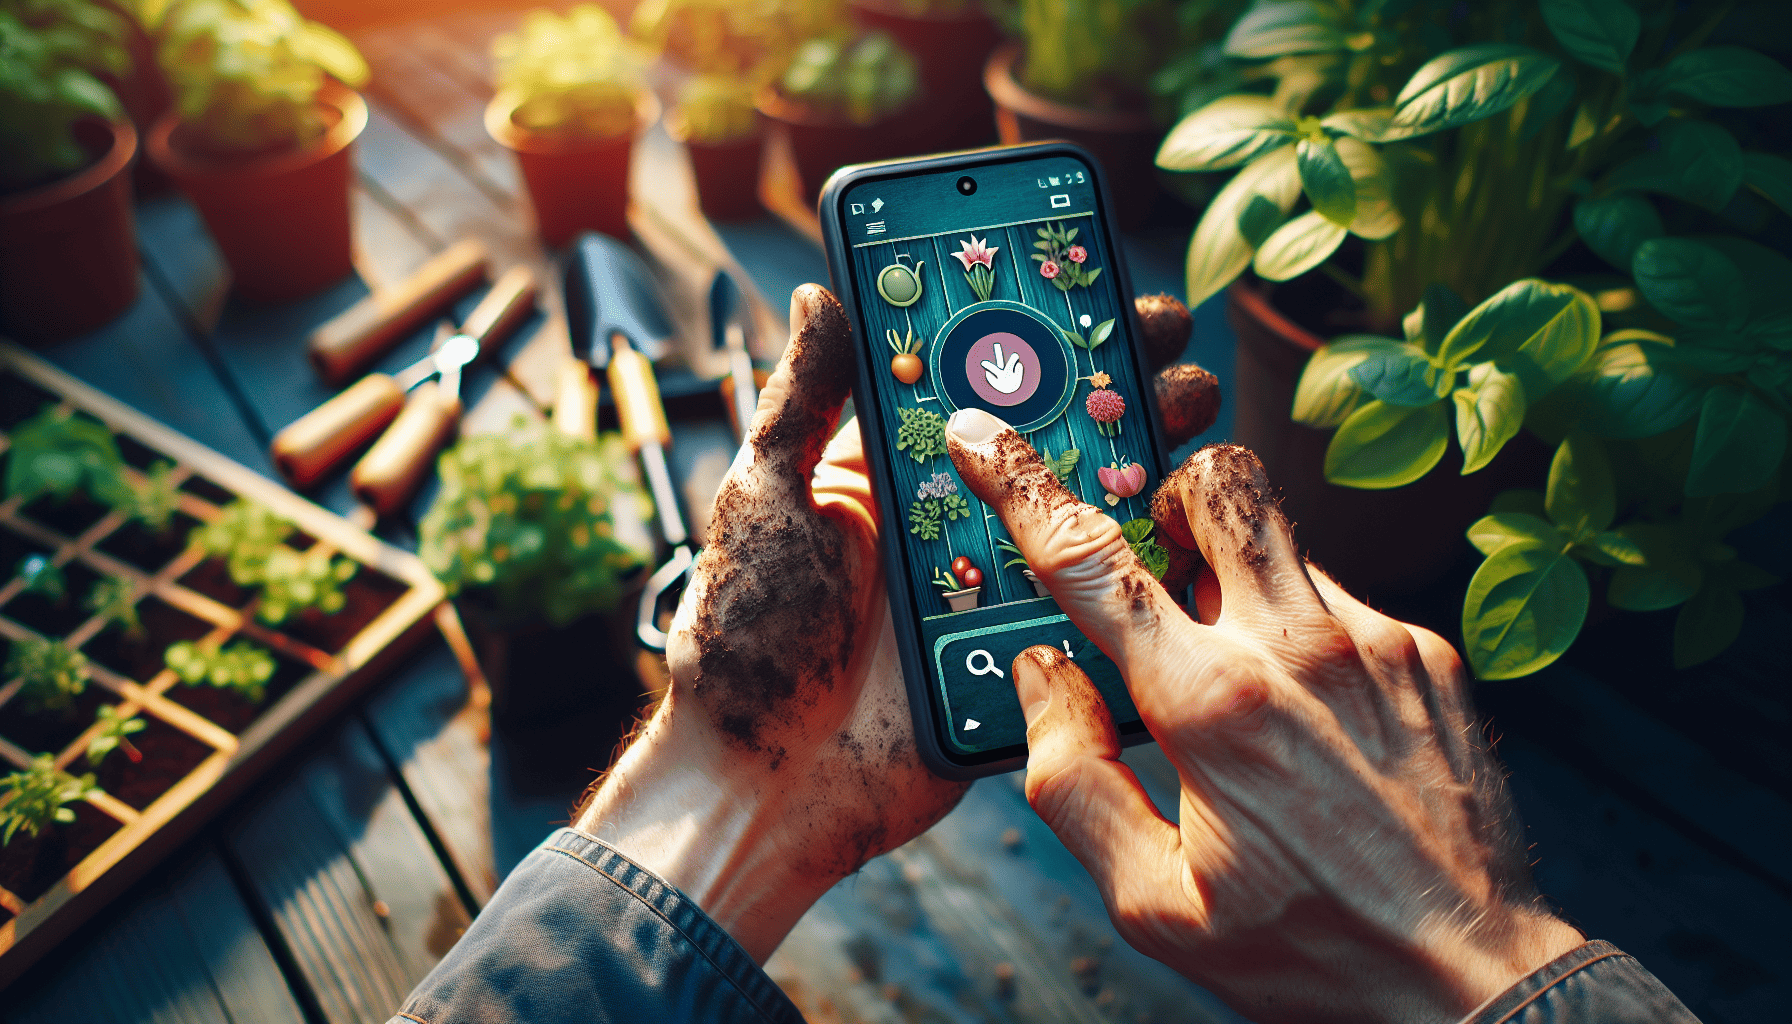 A person using a gardening app on a mobile phone